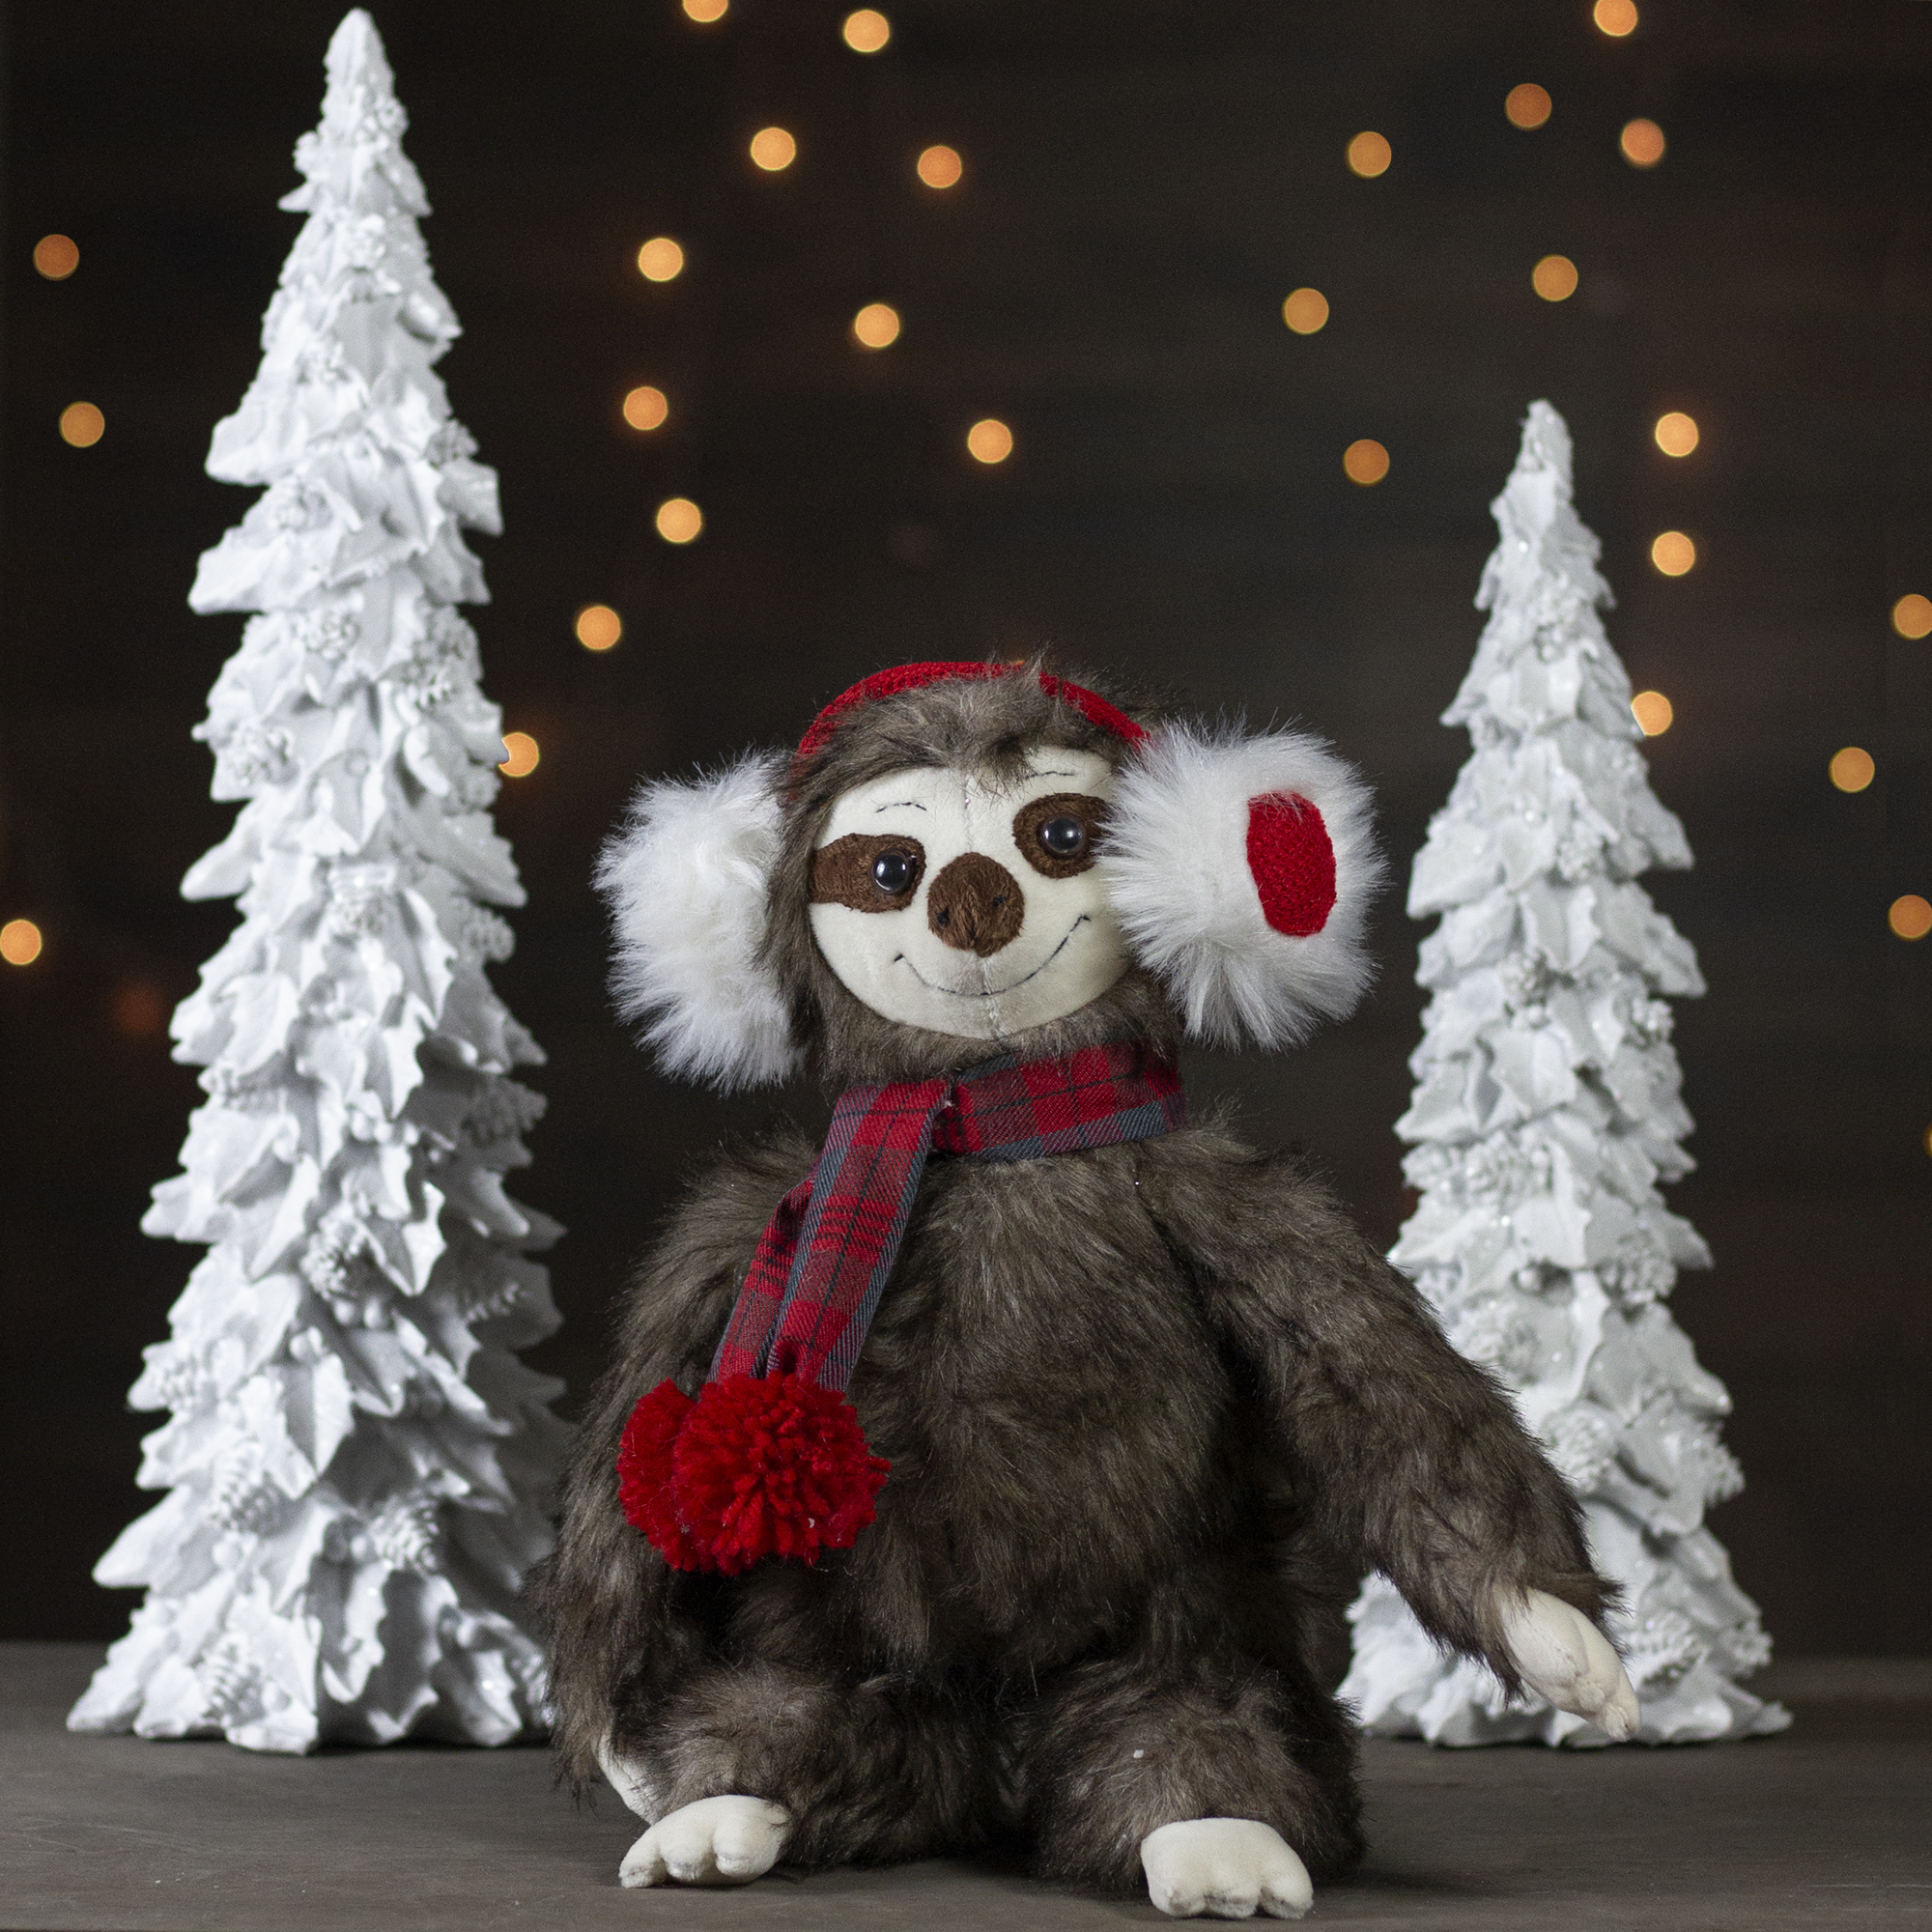 Northlight 12-Inches Plush Brown Sitting Sloth Christmas Tabletop Decoration